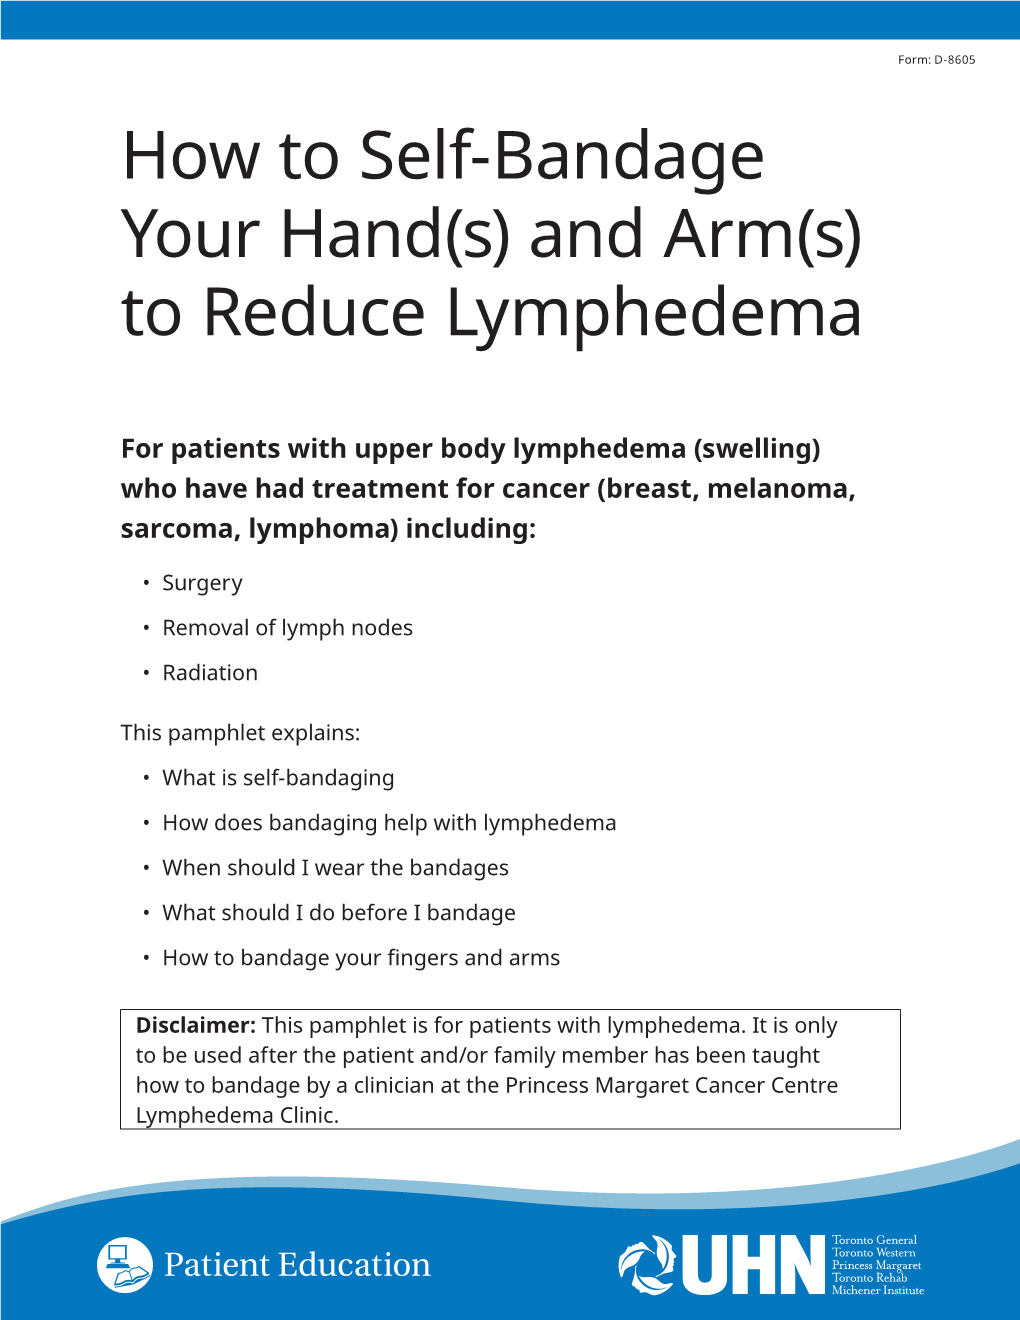 How to Self-Bandage Your Hand(S) and Arm(S) to Reduce Lymphedema